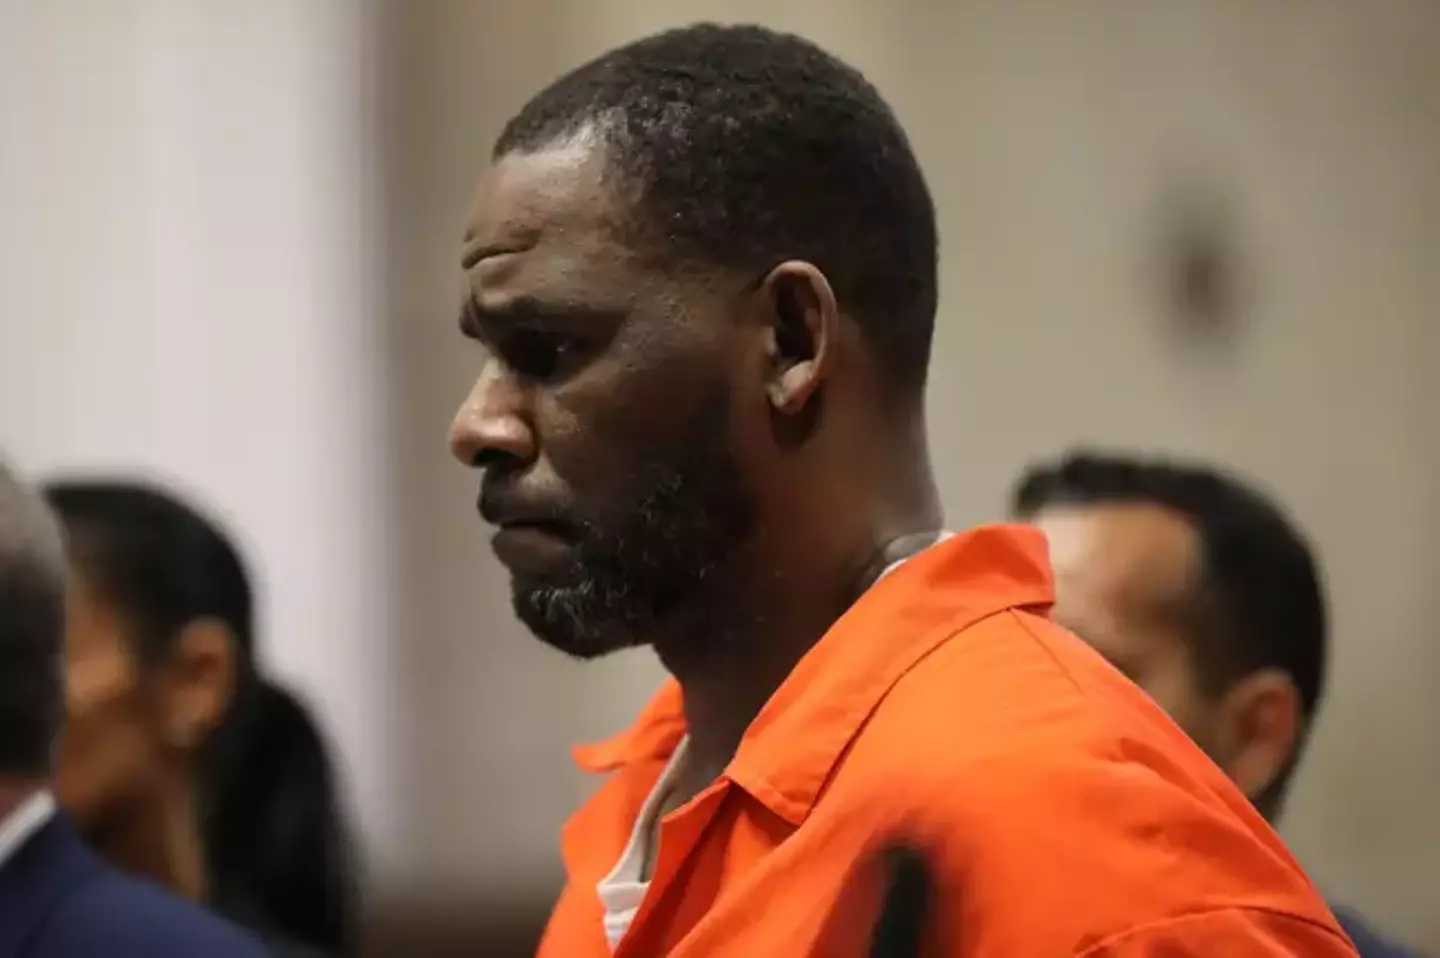 R. Kelly's lawyer says he has been placed on suicide watch.